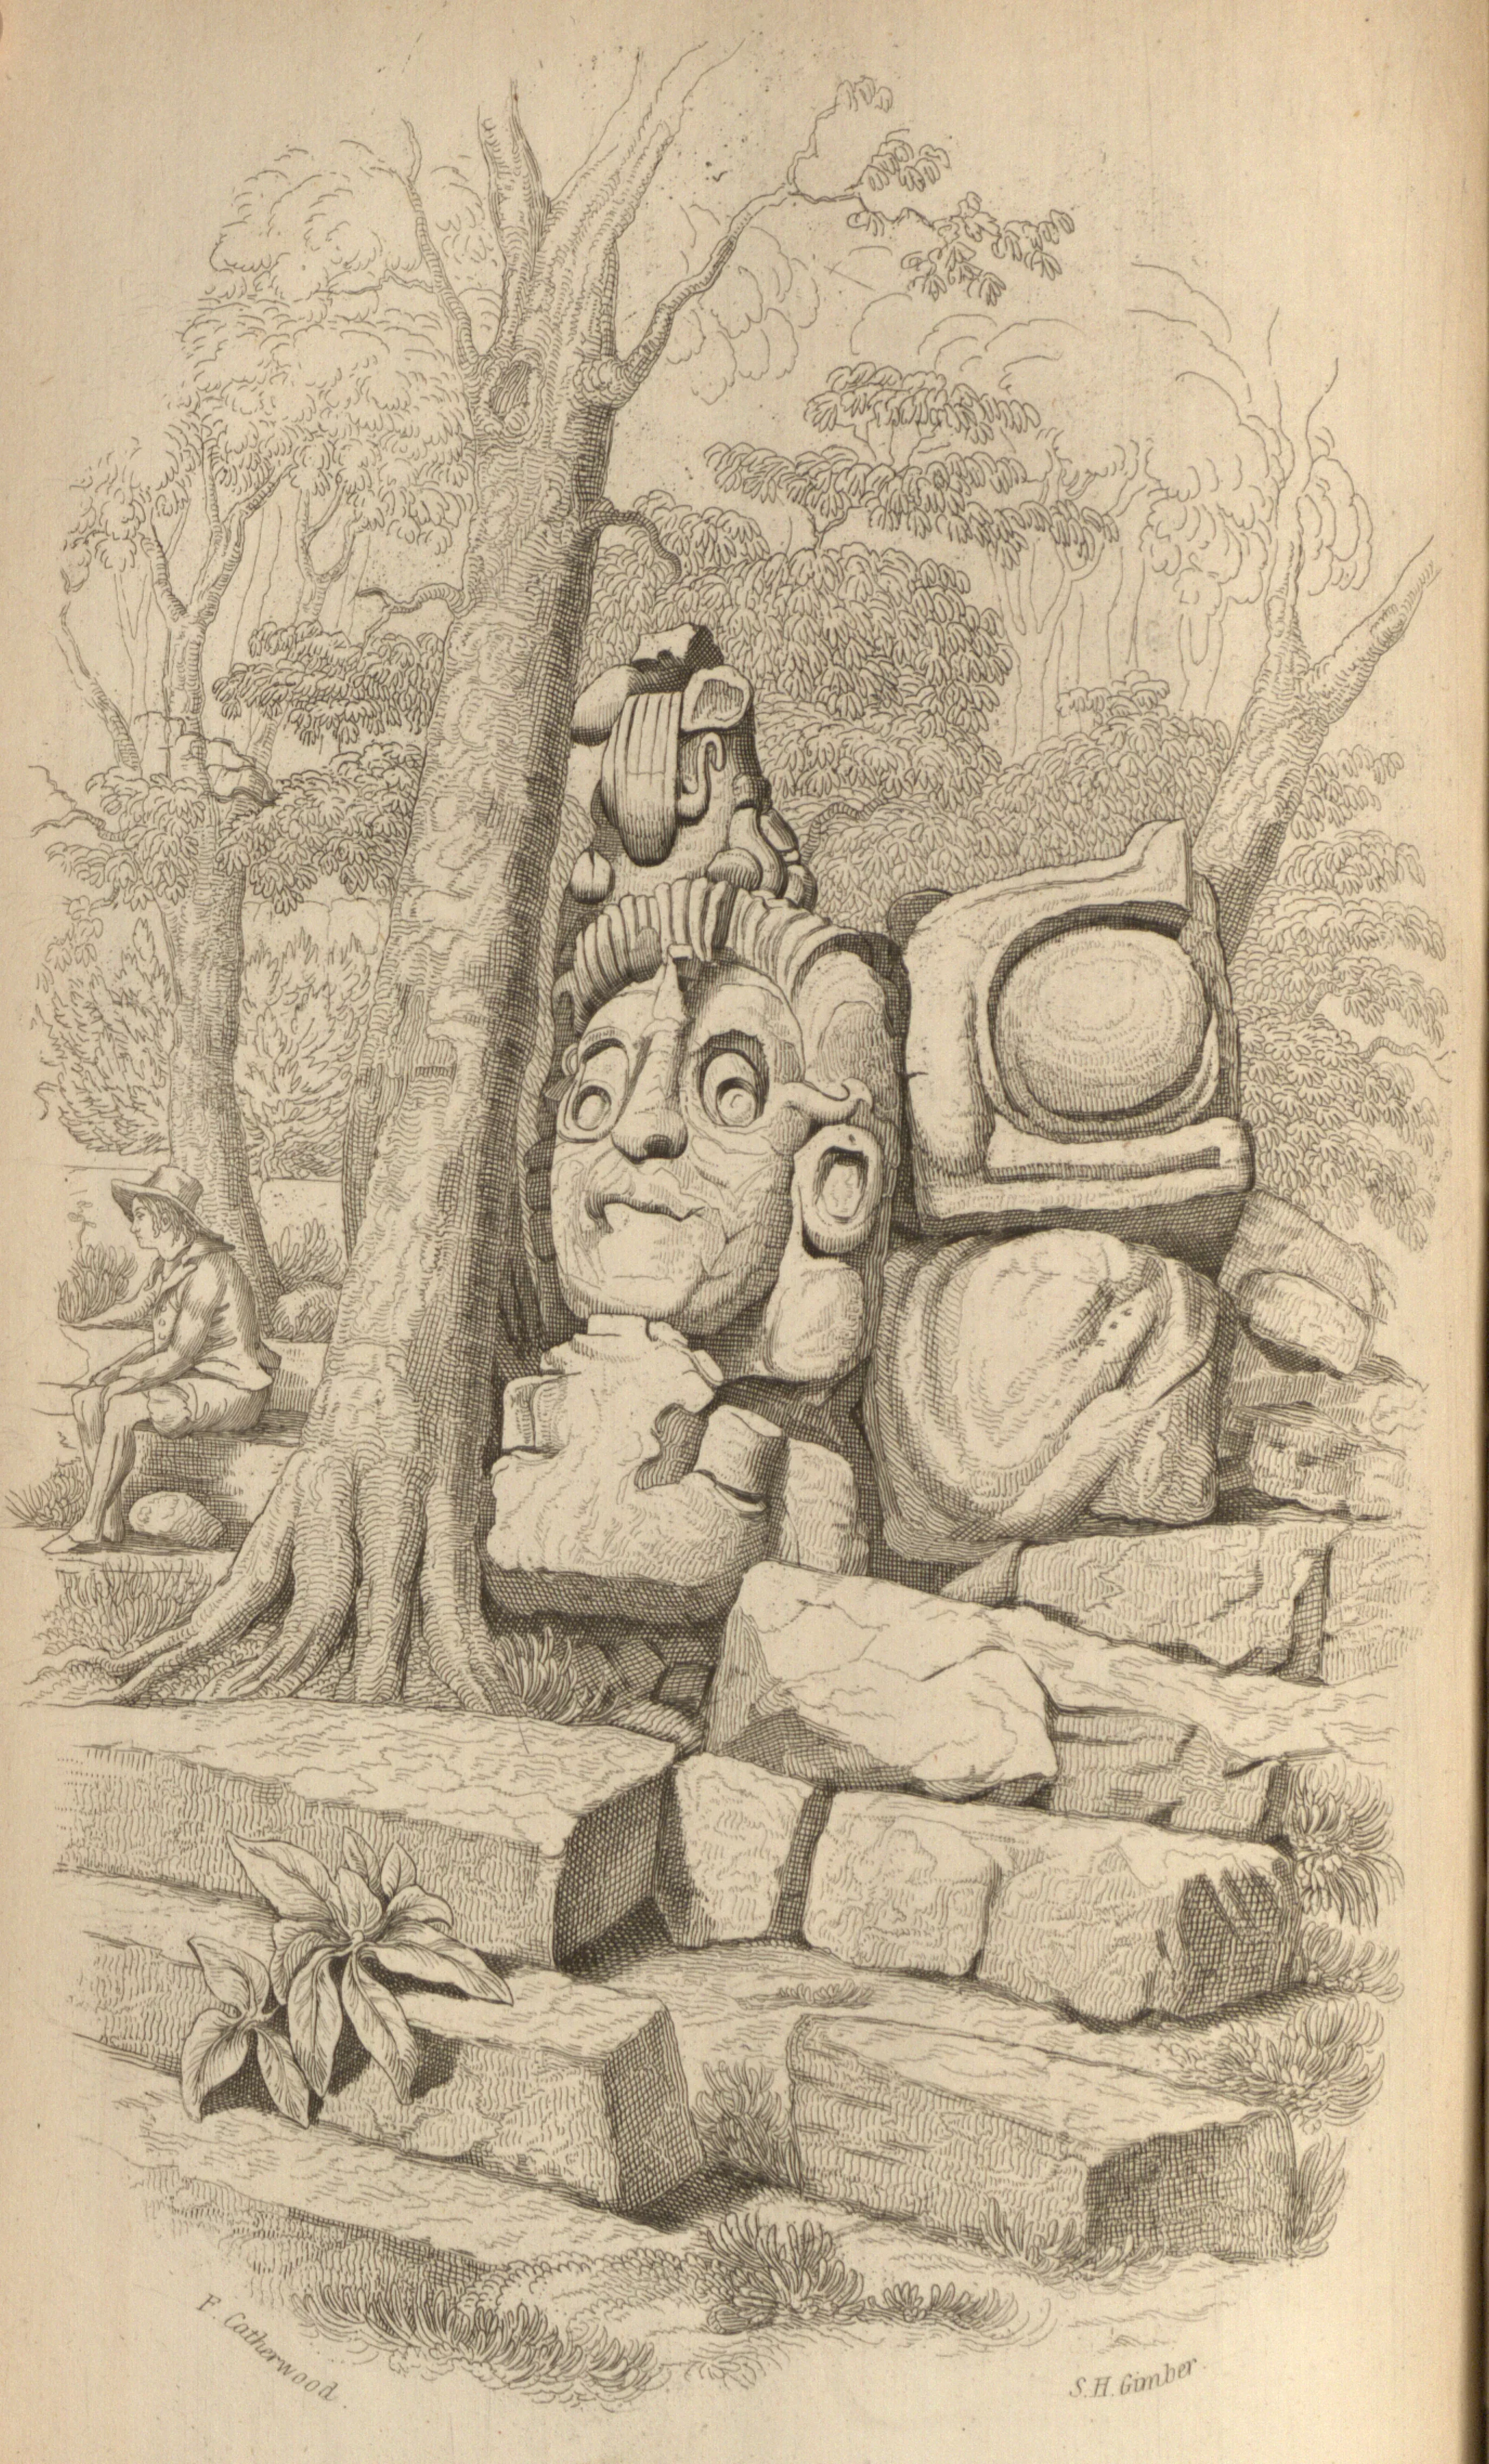 Giant head from Copán